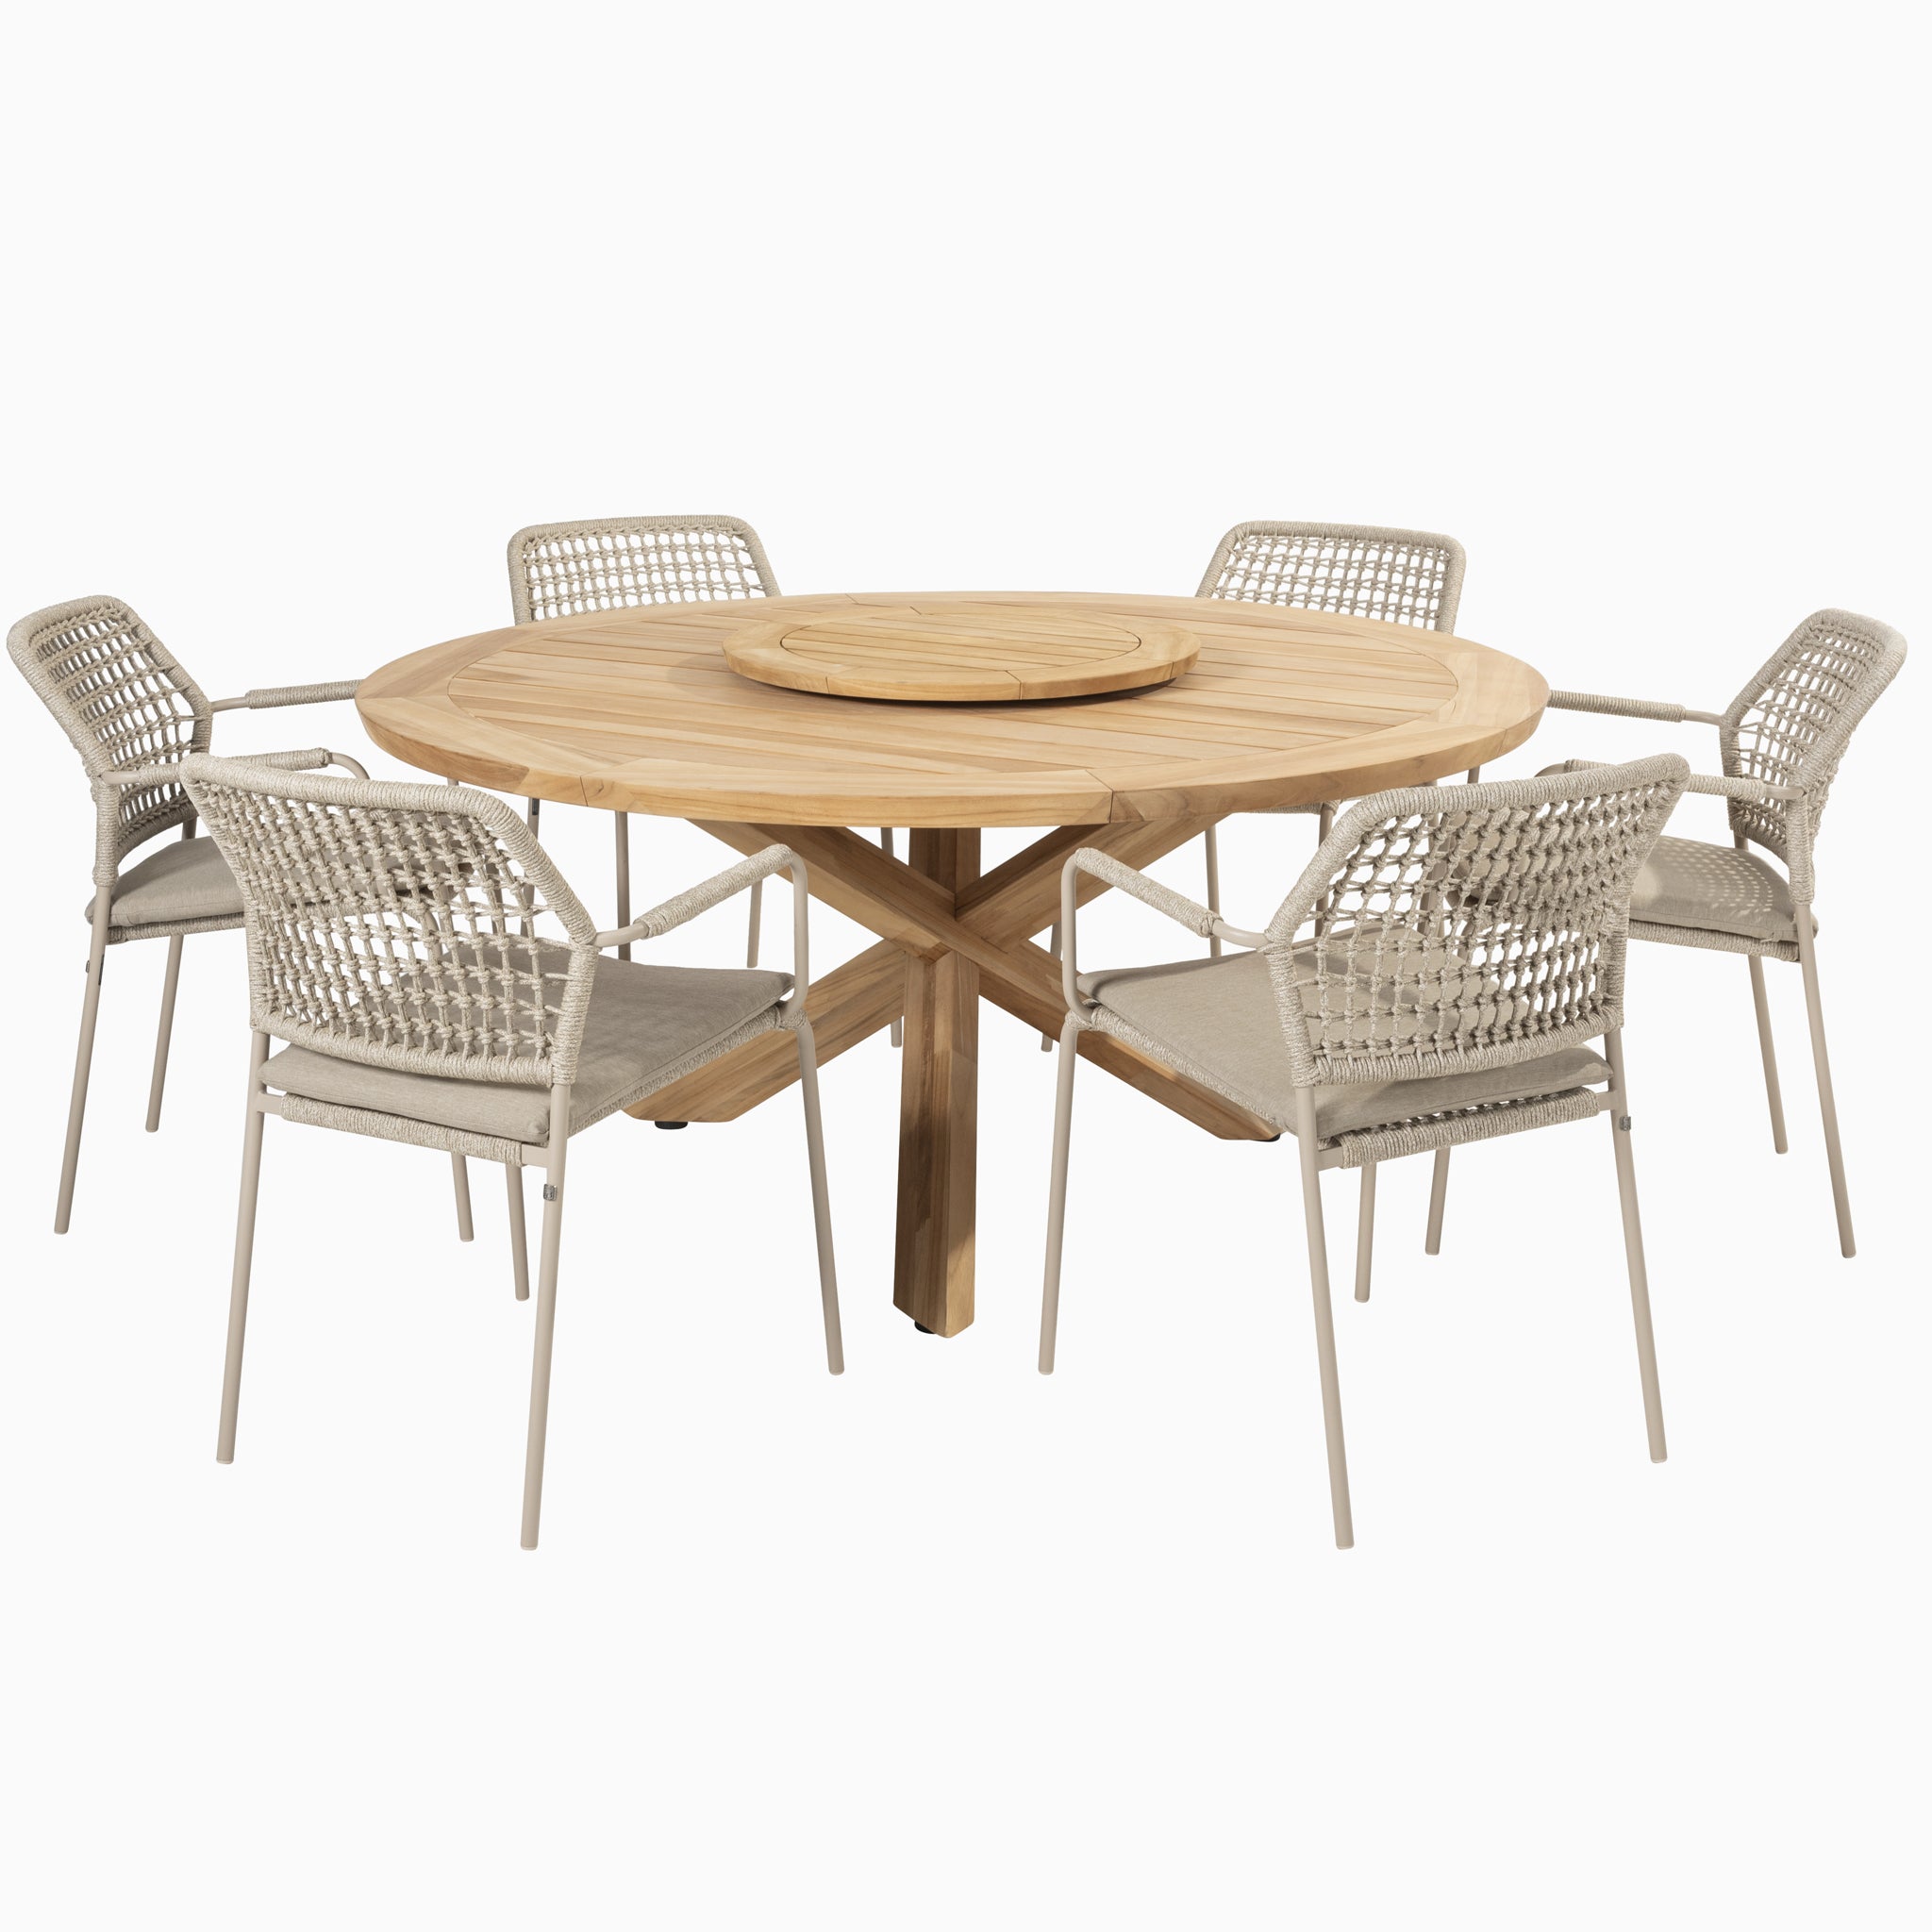 Barista 6 Seat Round Dining Set with Lazy Susan in Latte